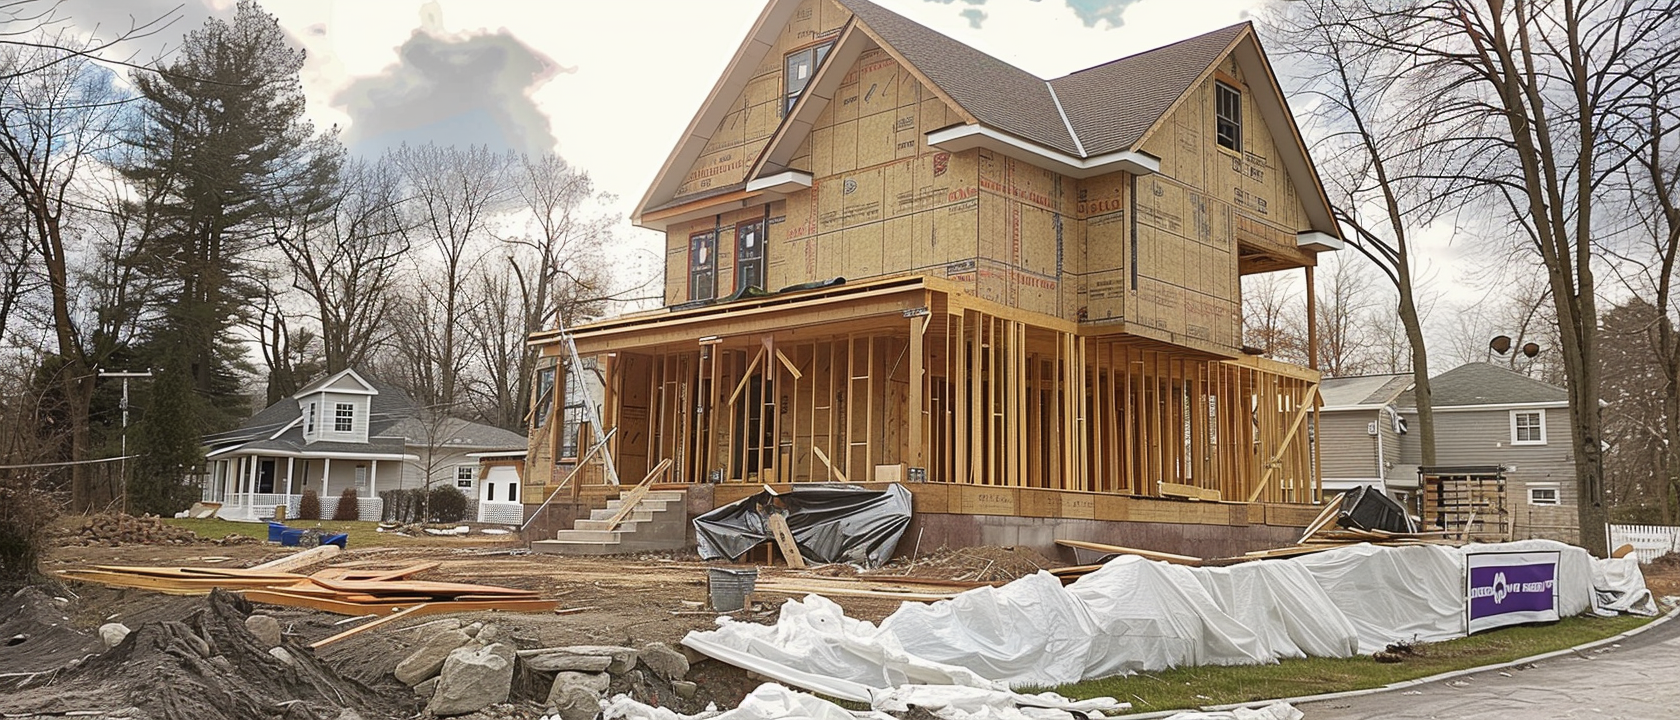 Sharp Drop in Single-Family Home Construction Marks Major Blow to Housing Market